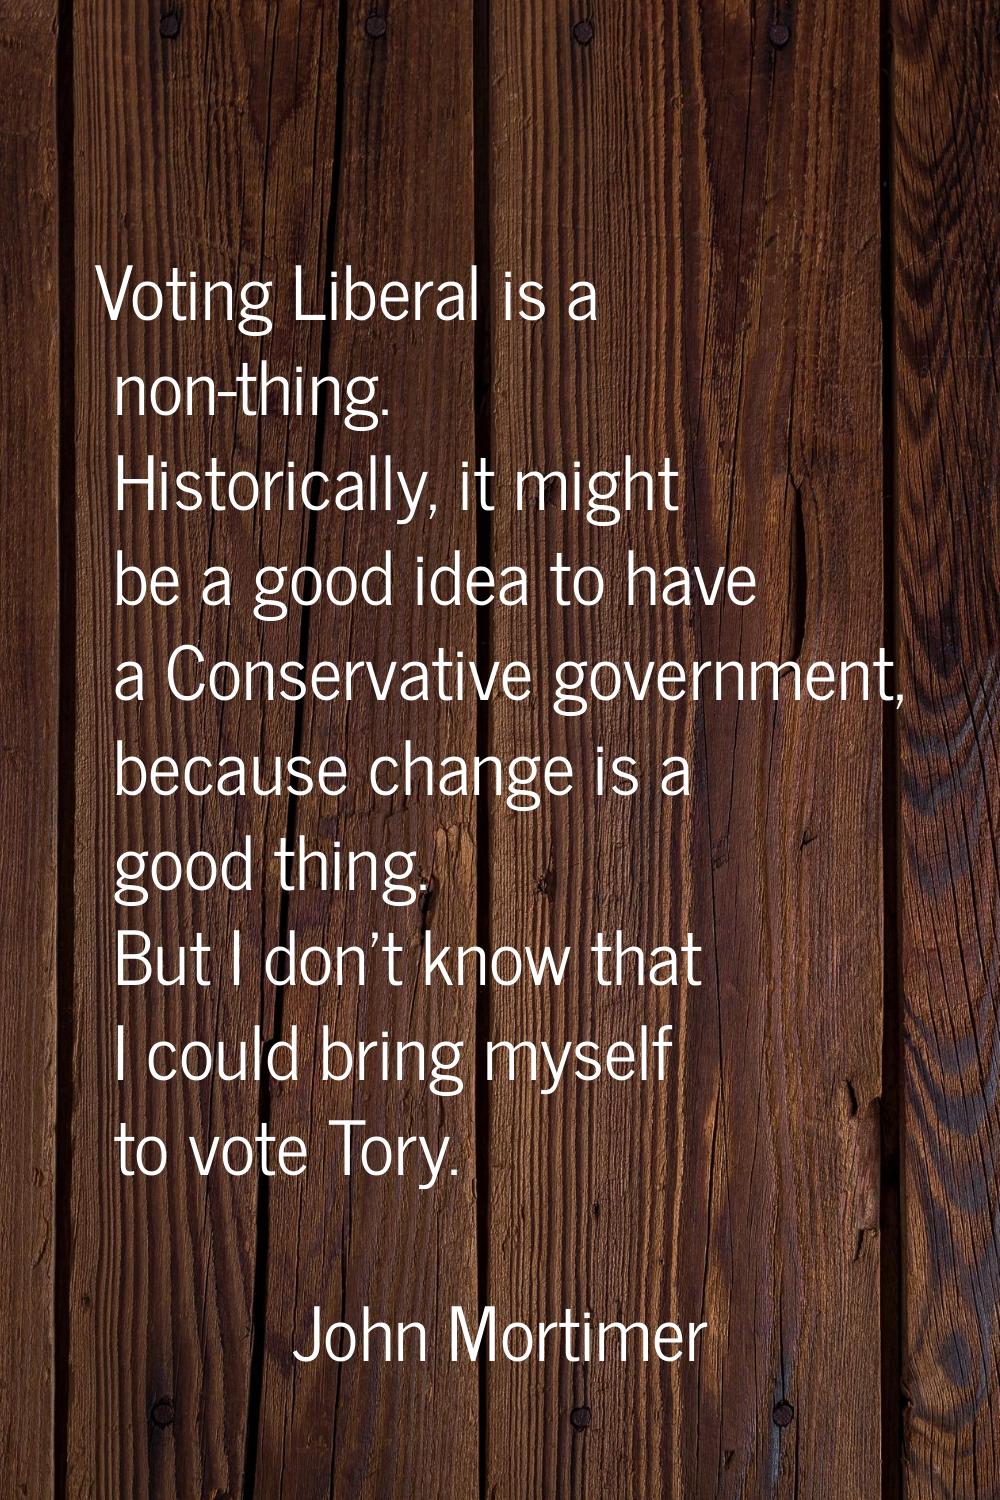 Voting Liberal is a non-thing. Historically, it might be a good idea to have a Conservative governm